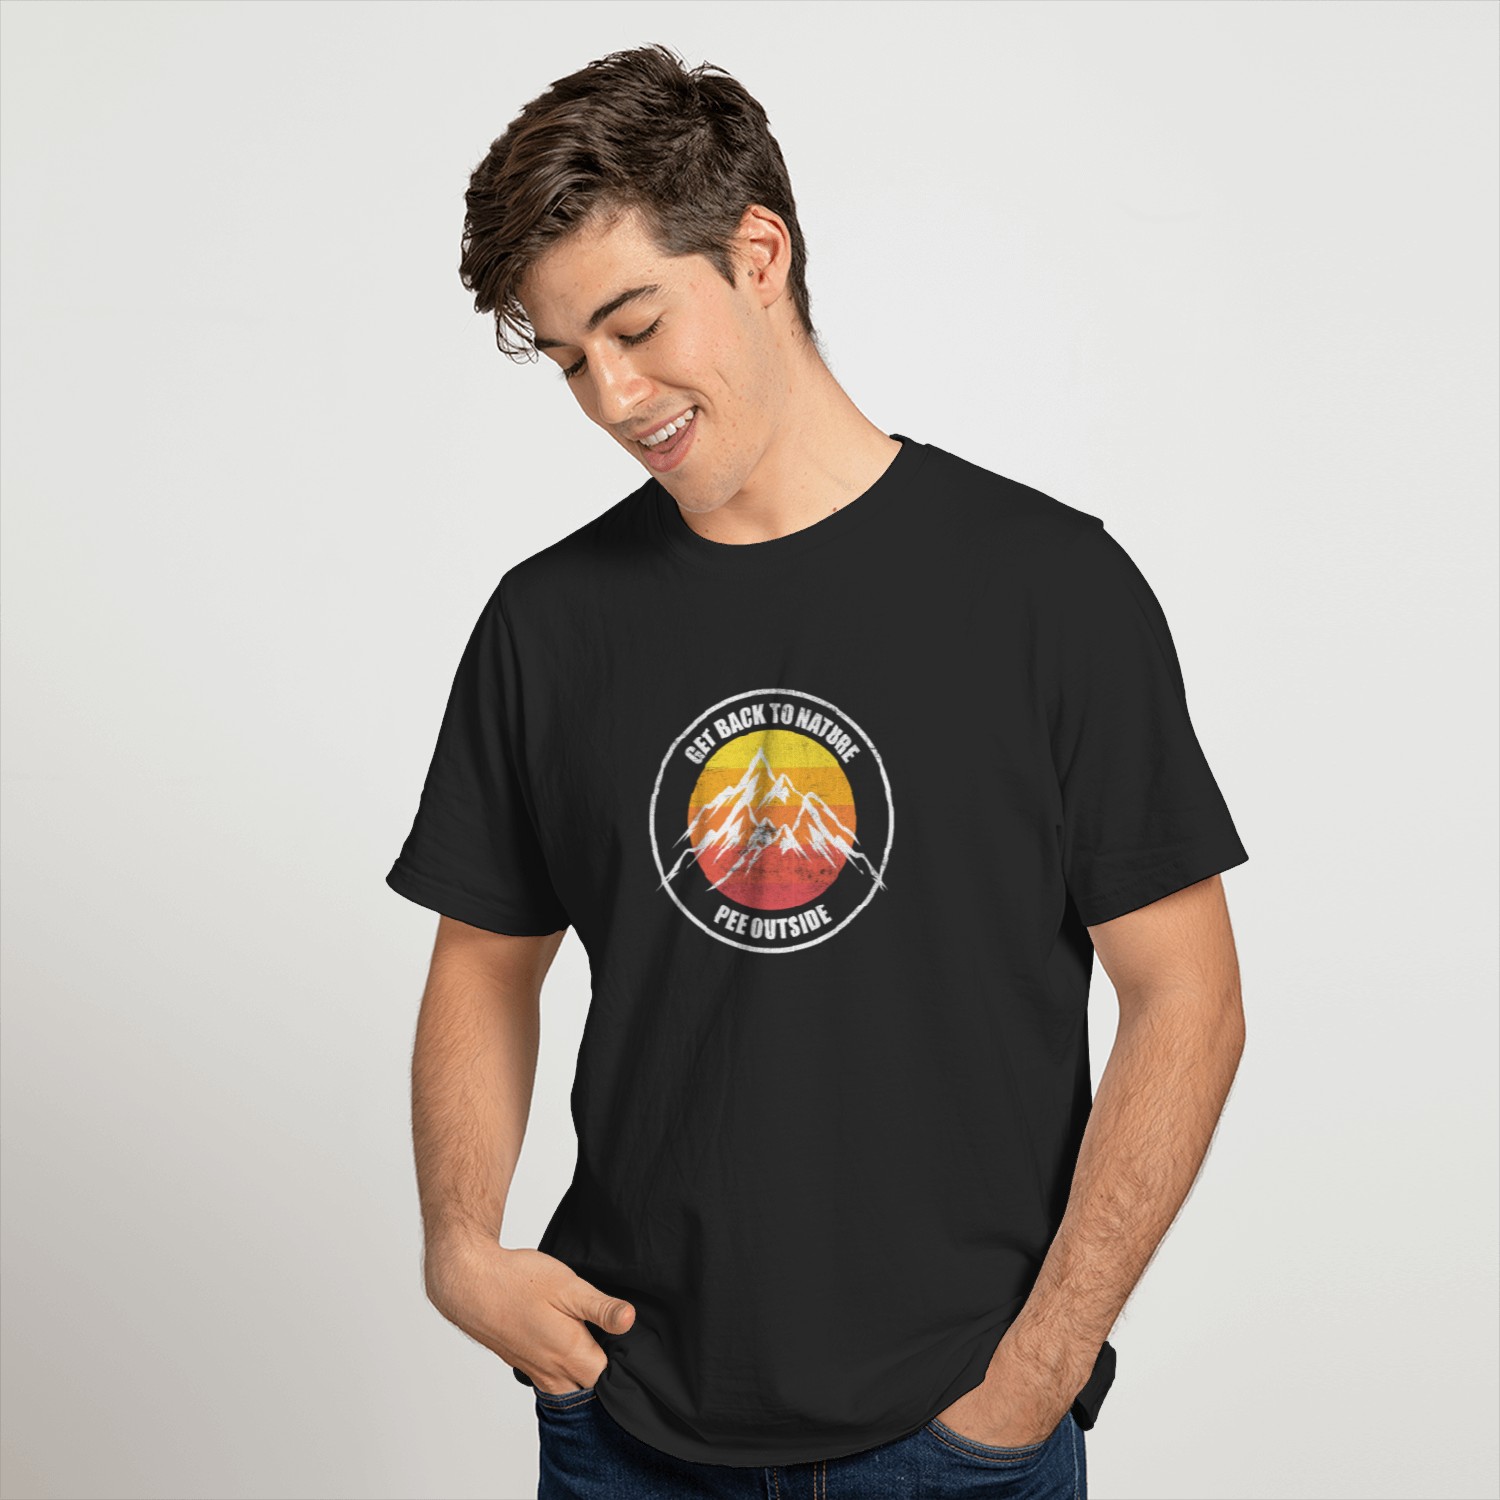 Funny hiking backpacking outdoors T-shirt